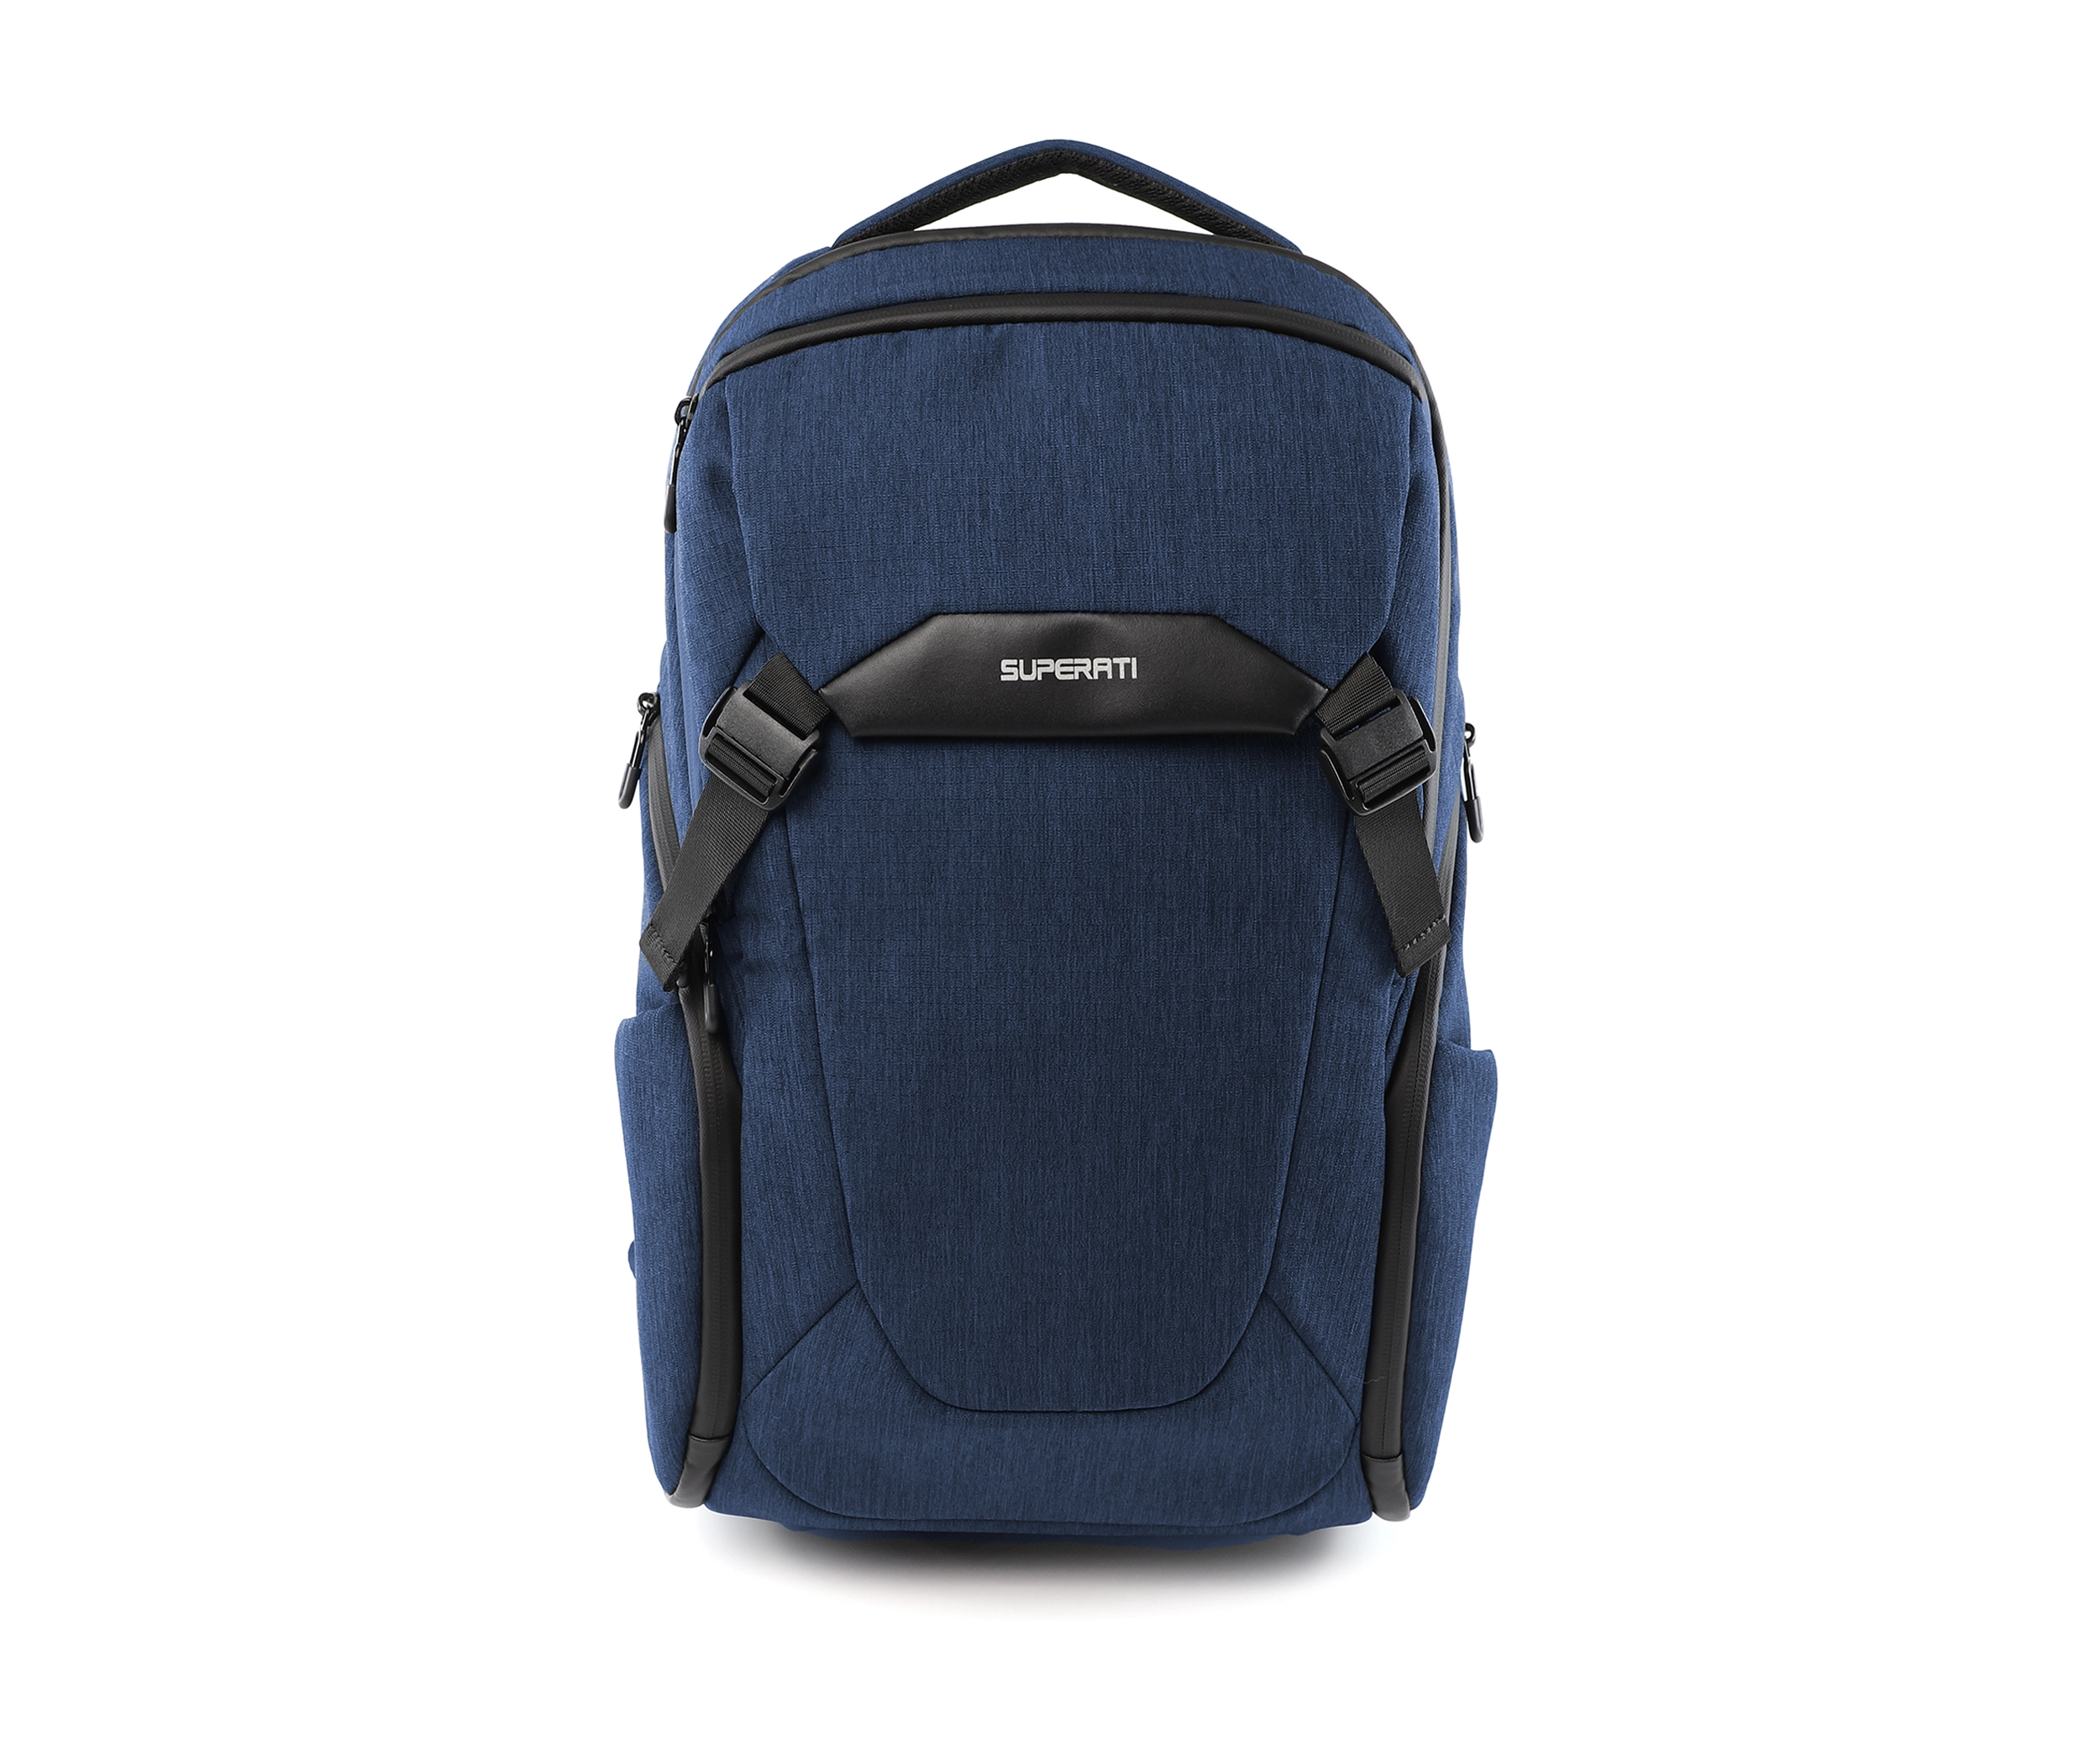 sapphire blue backpack